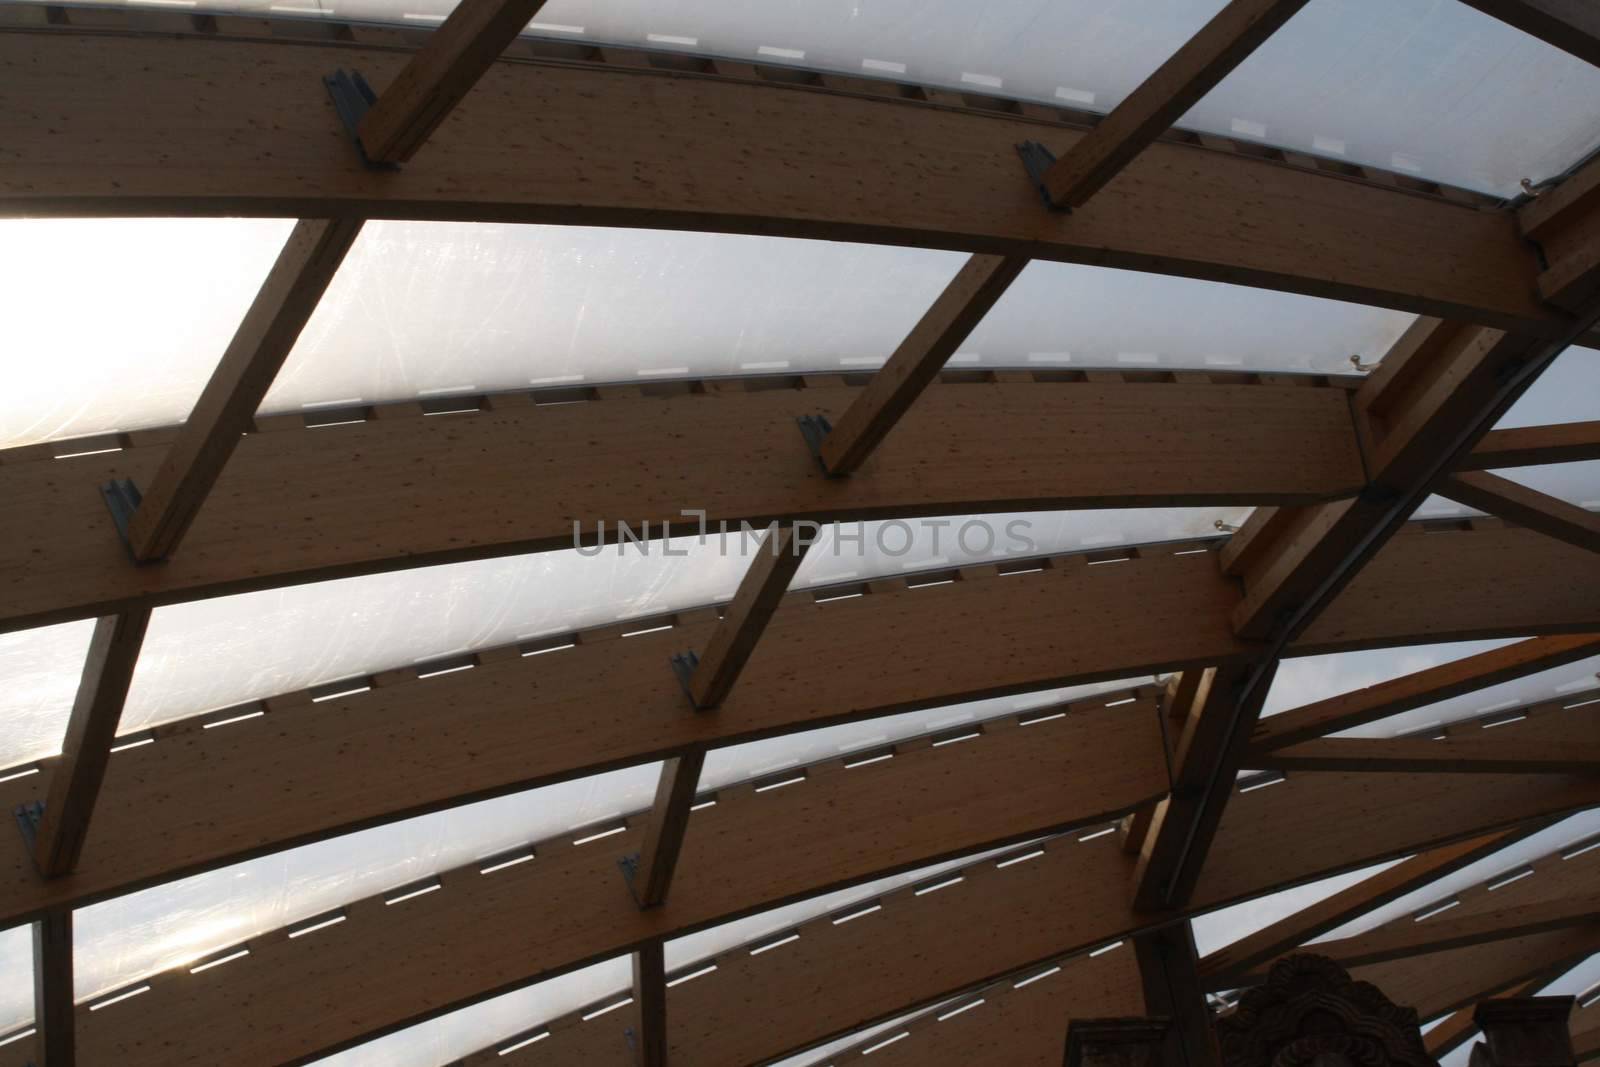 The roof structure of the Aquaticum in Budapest, photographed from the inside by balage941